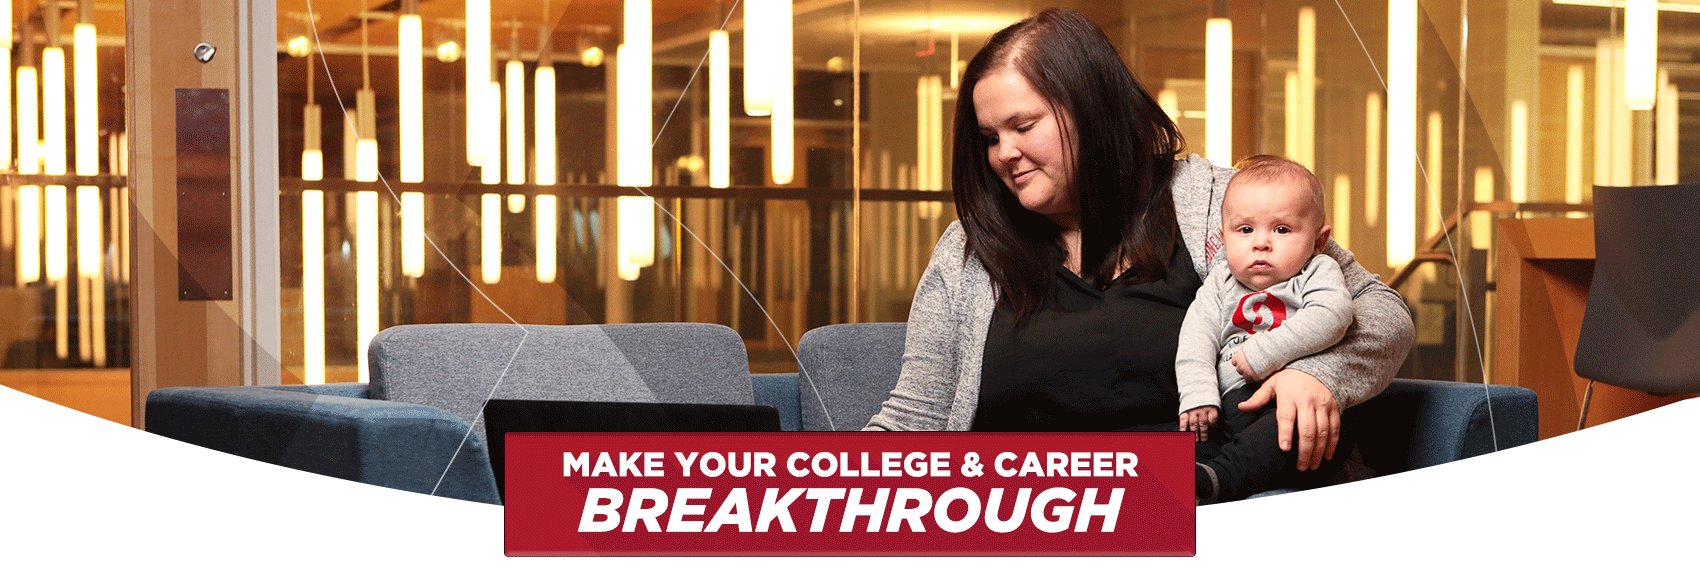 Adult Learners - Make Your College & Career Breakthrough